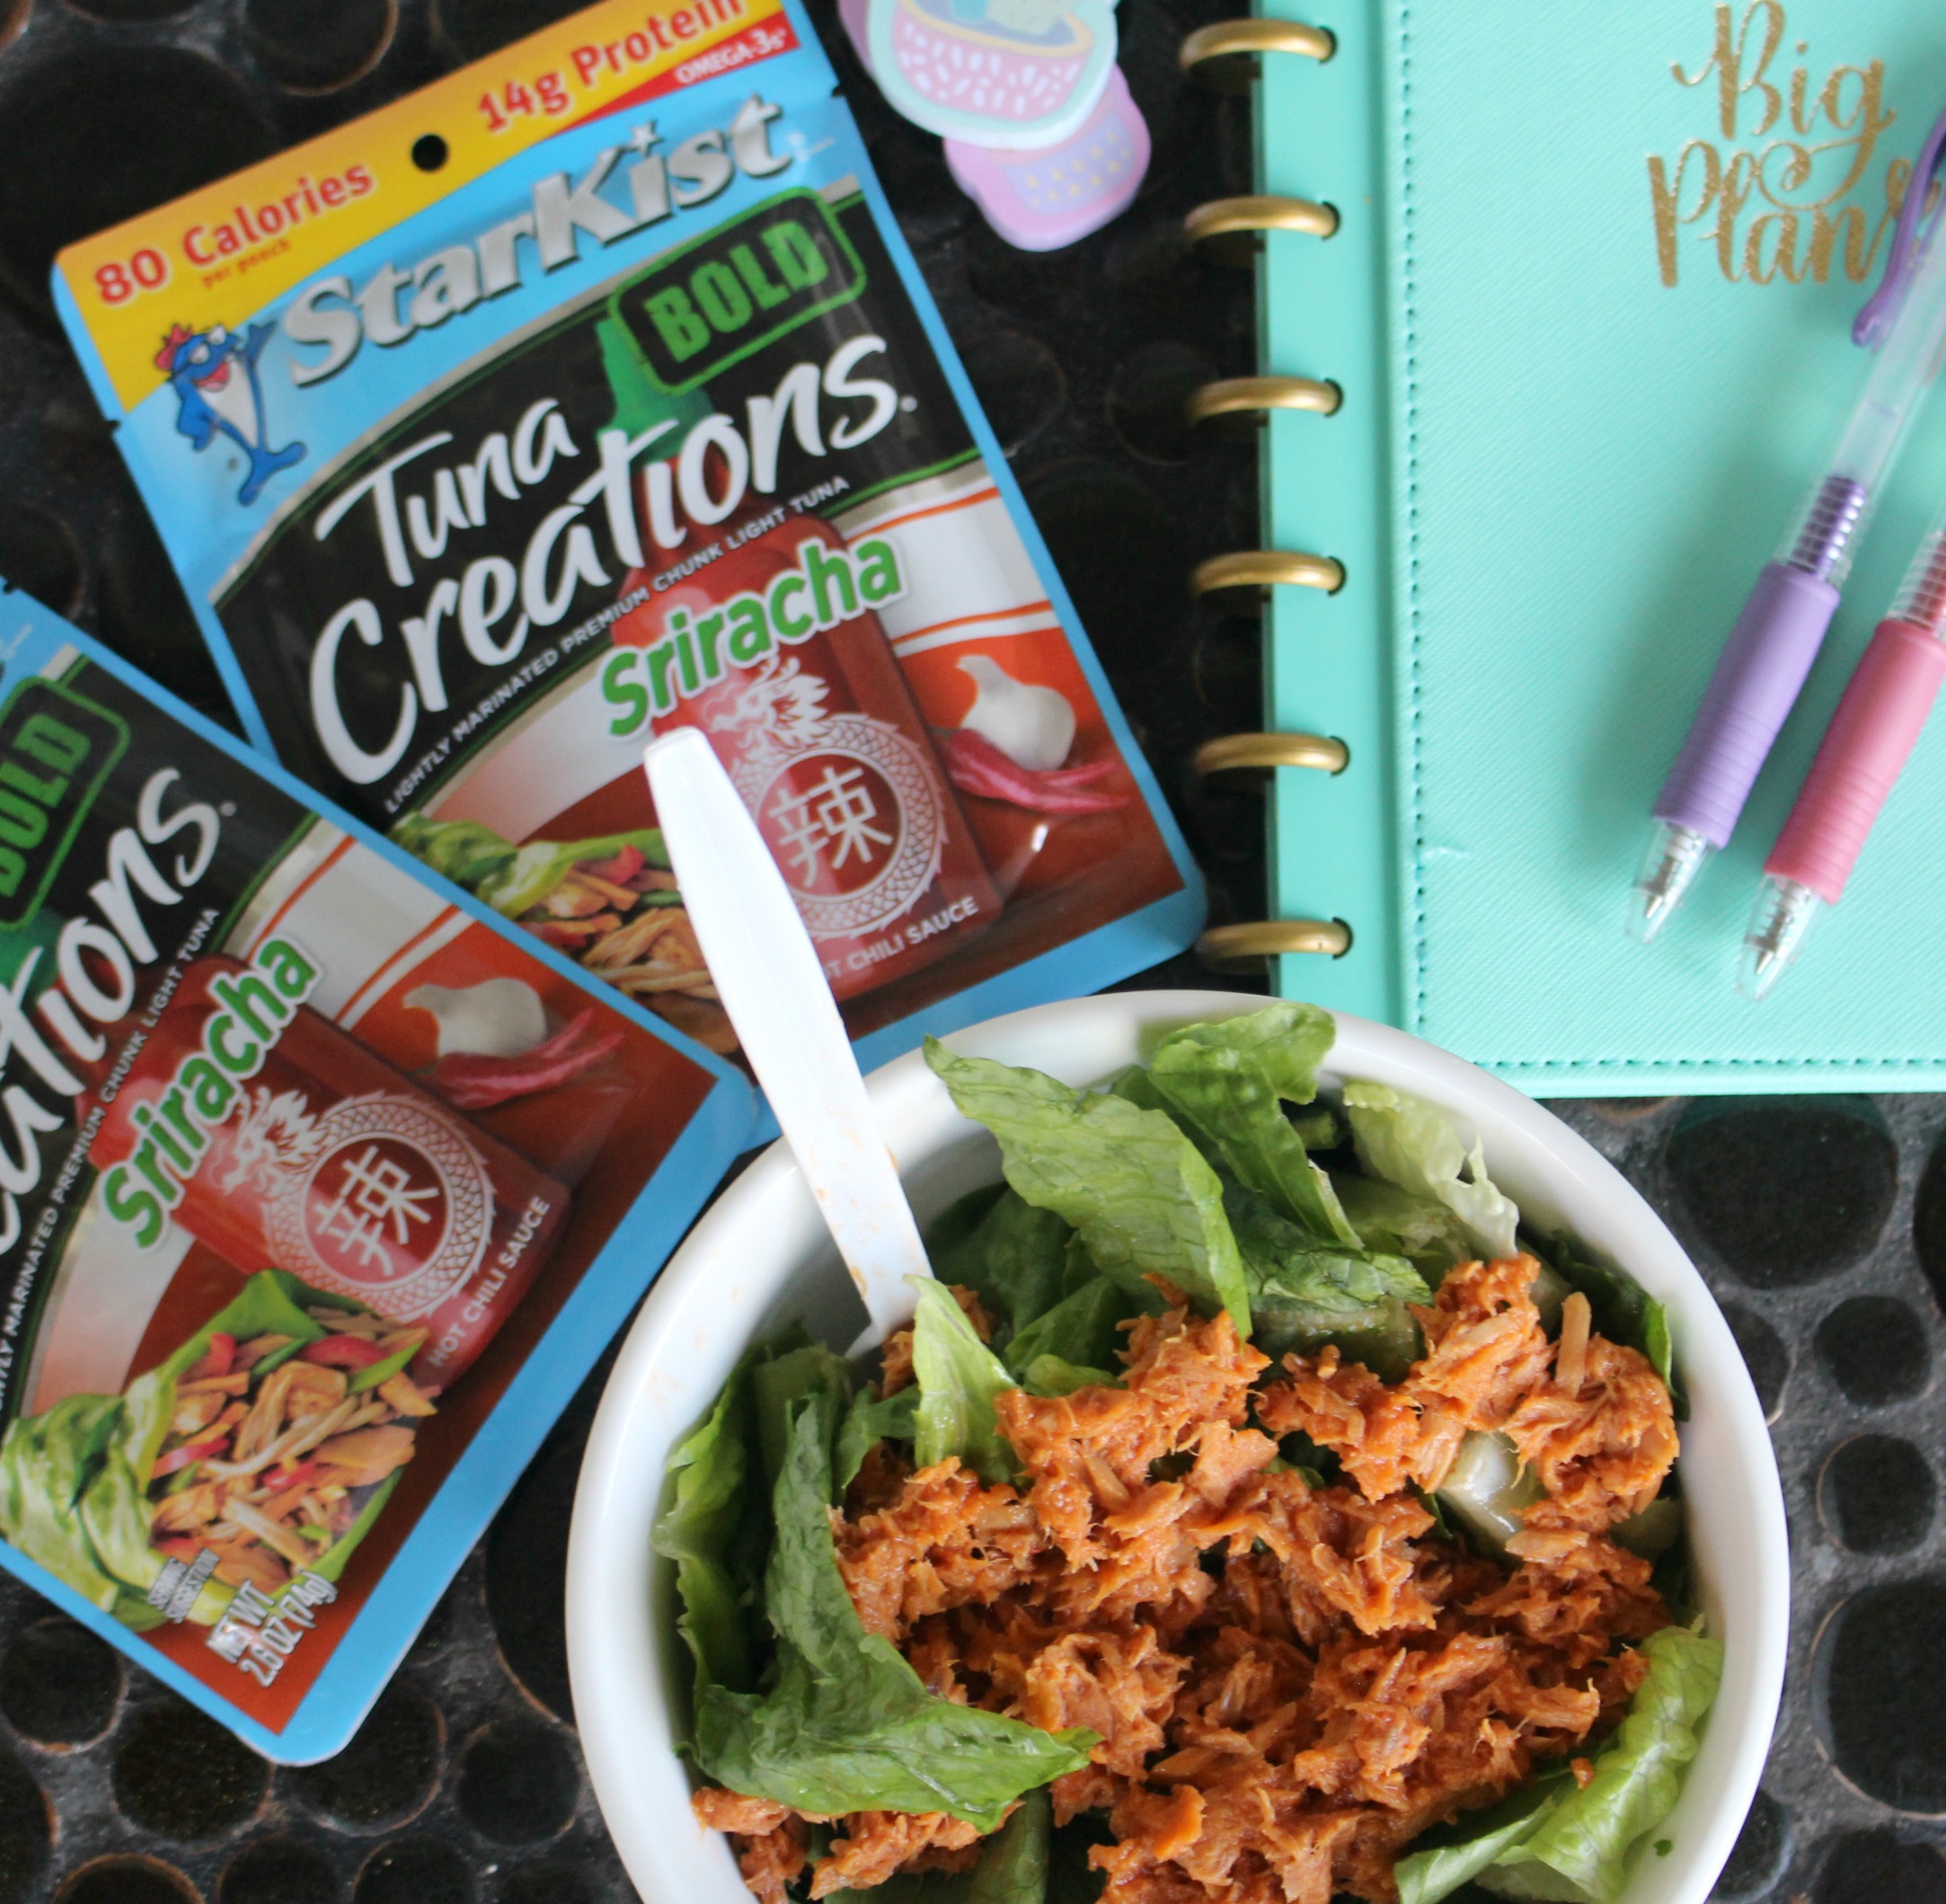 Add a Bold New Taste to Your Lunch on the Go!